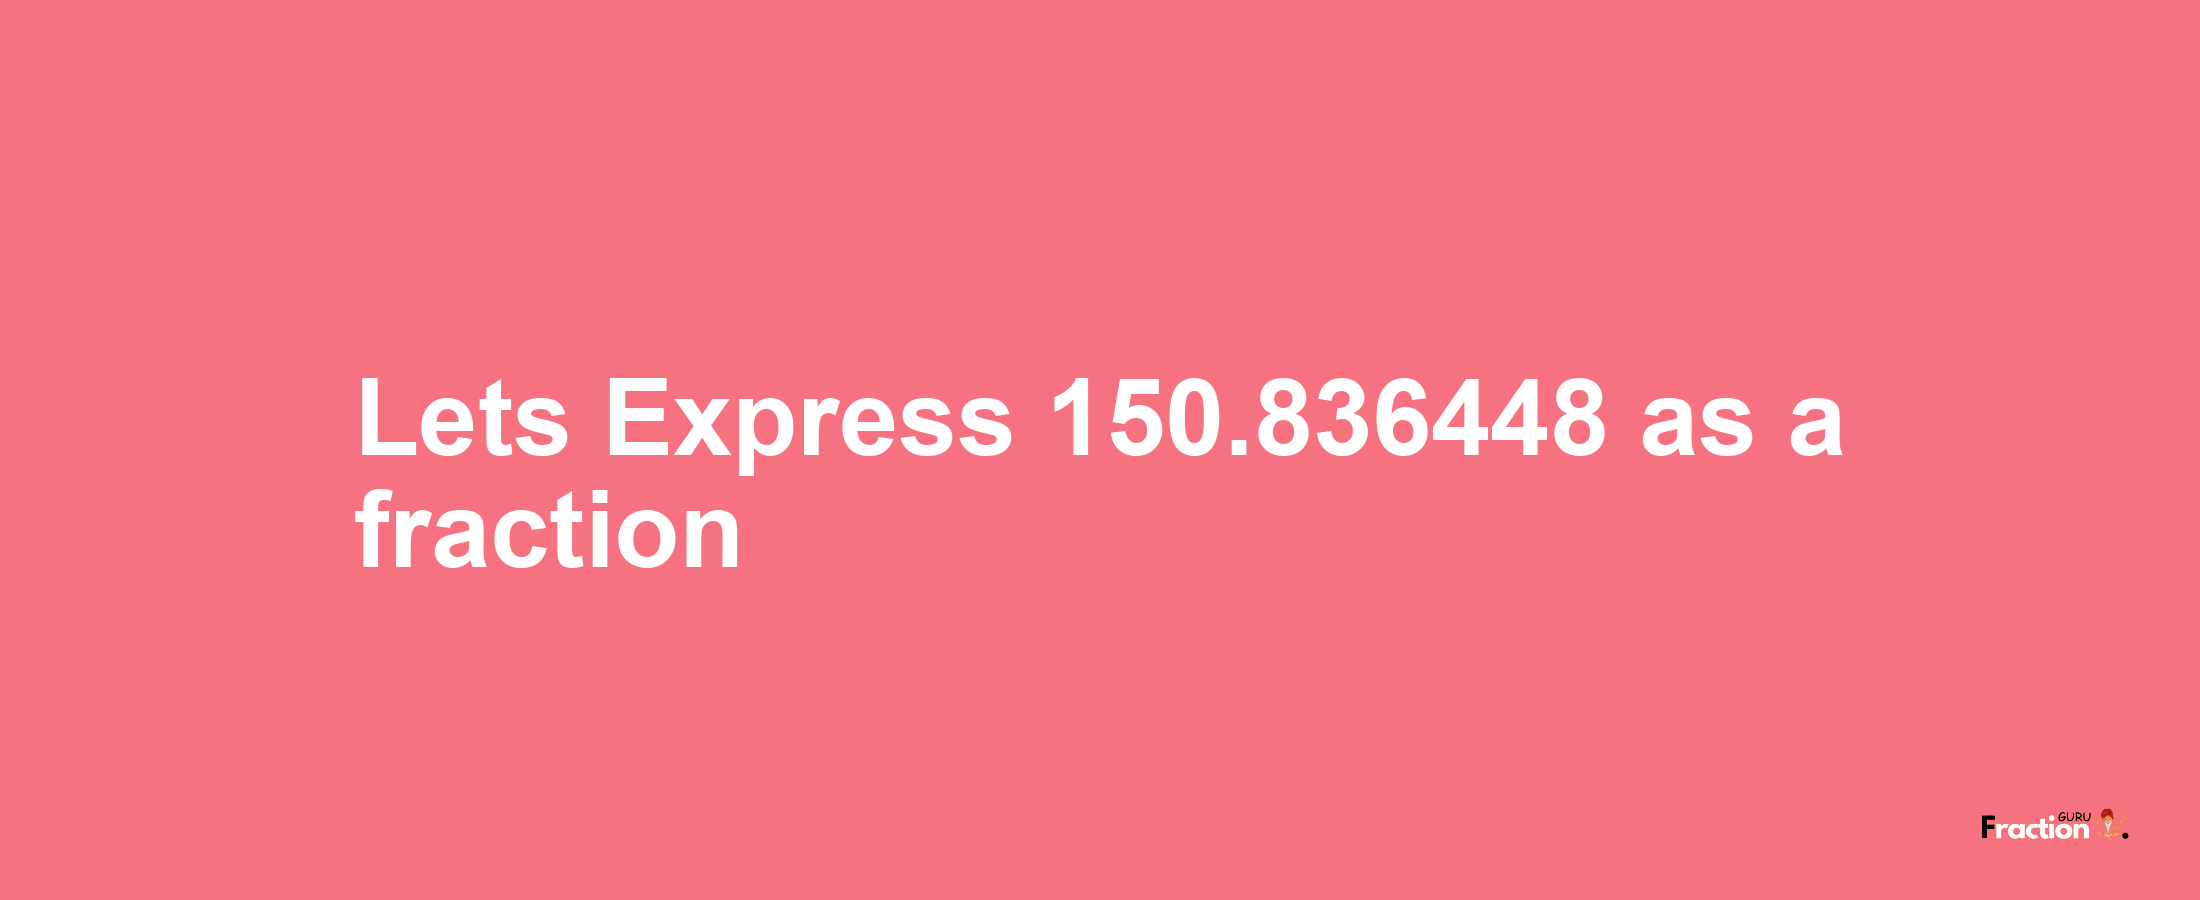 Lets Express 150.836448 as afraction